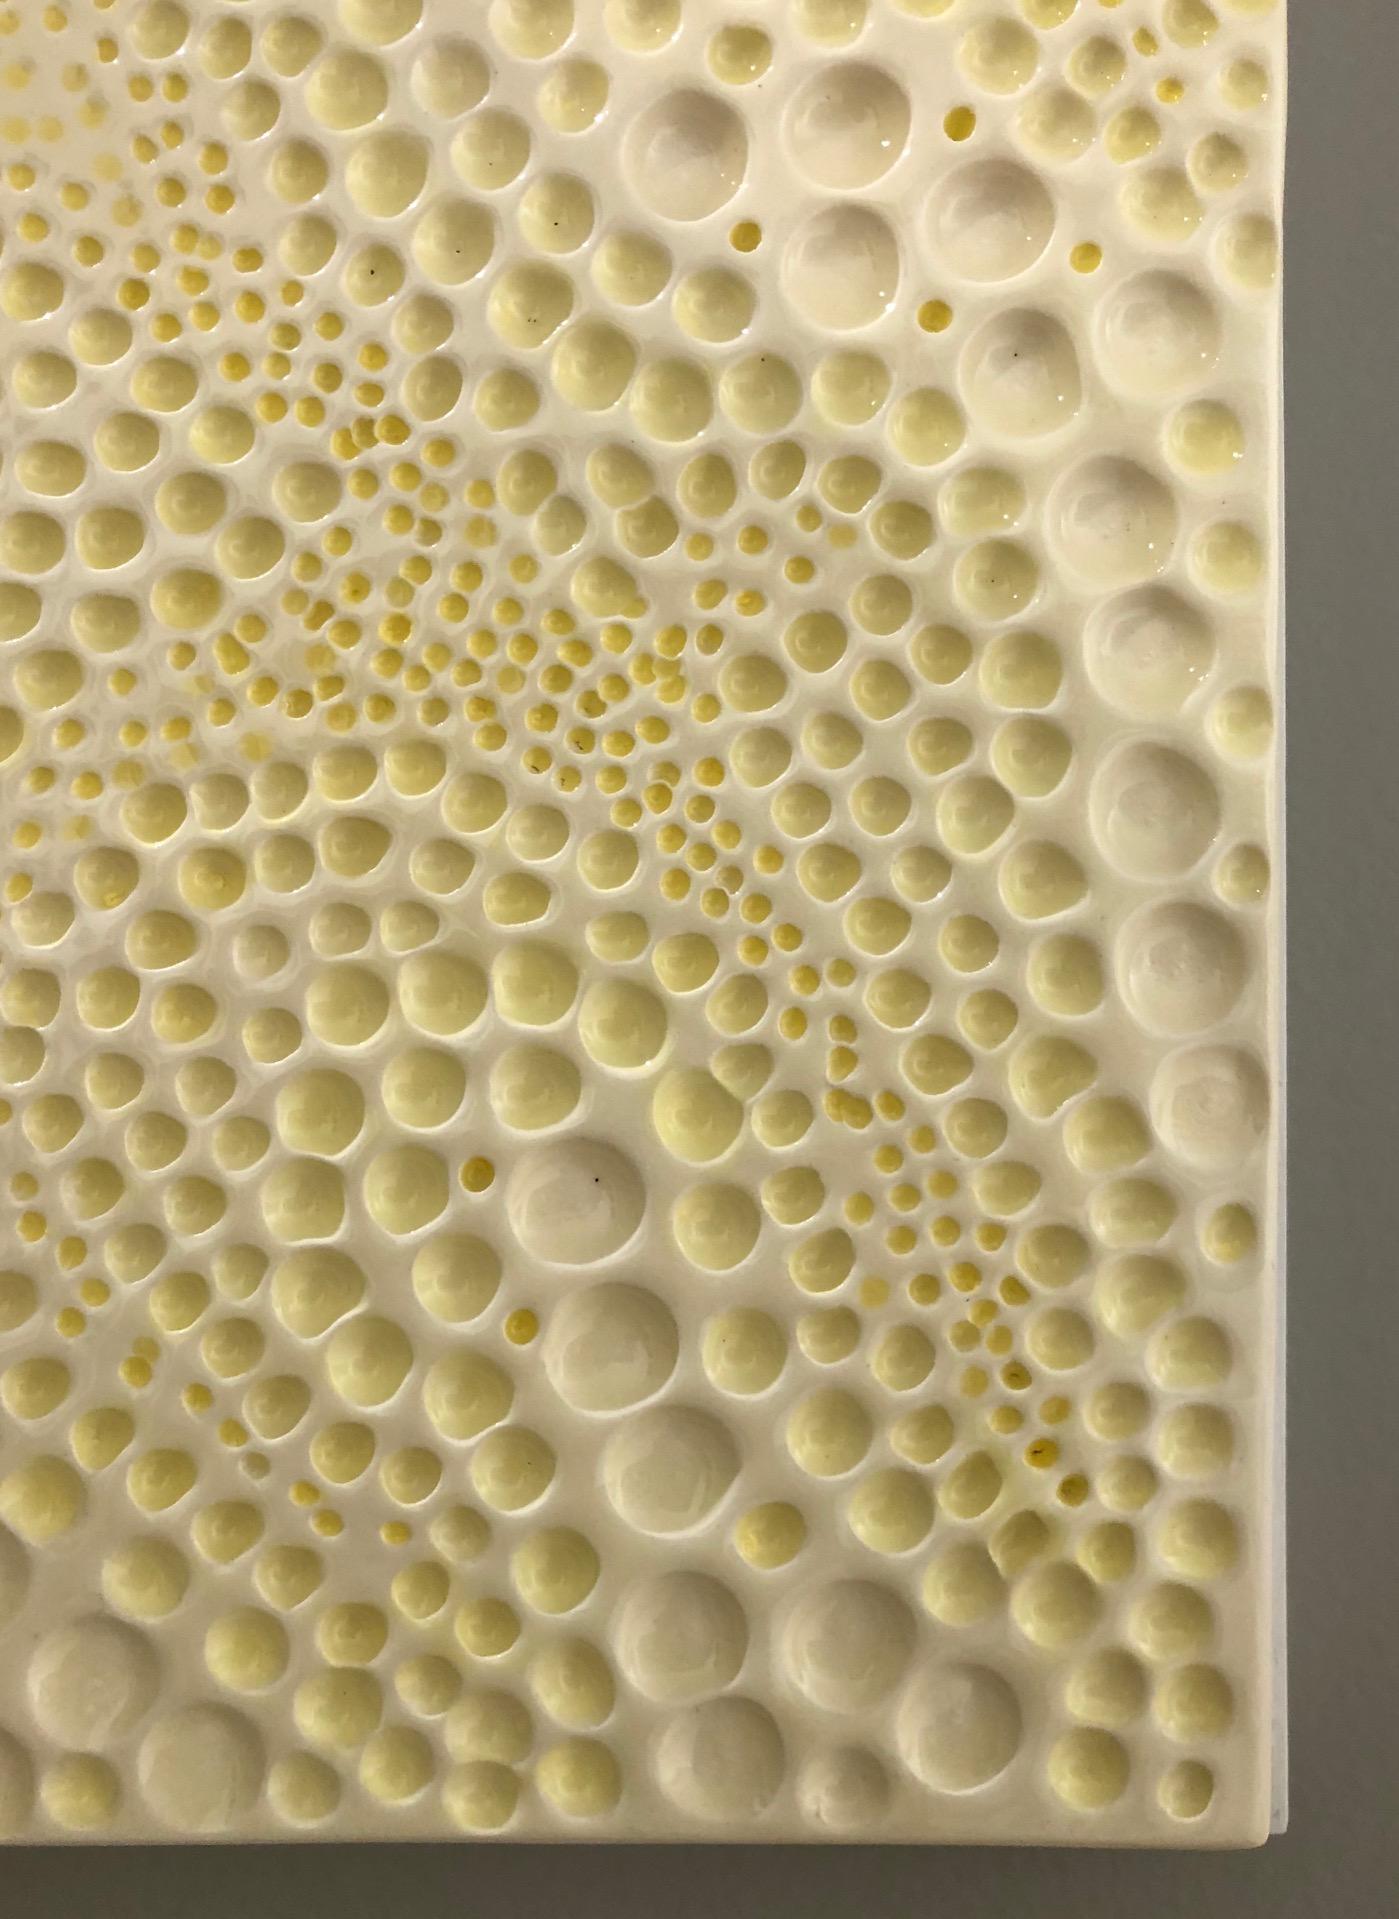 Ceramic abstract wall sculpture in yellow and white. A neutral in color - minimal, clean work created with low-fire ceramic over white wood from Pop Art pioneer Jane B. Grimm, whose minimal and meditative sculptures and wall reliefs are comprised of